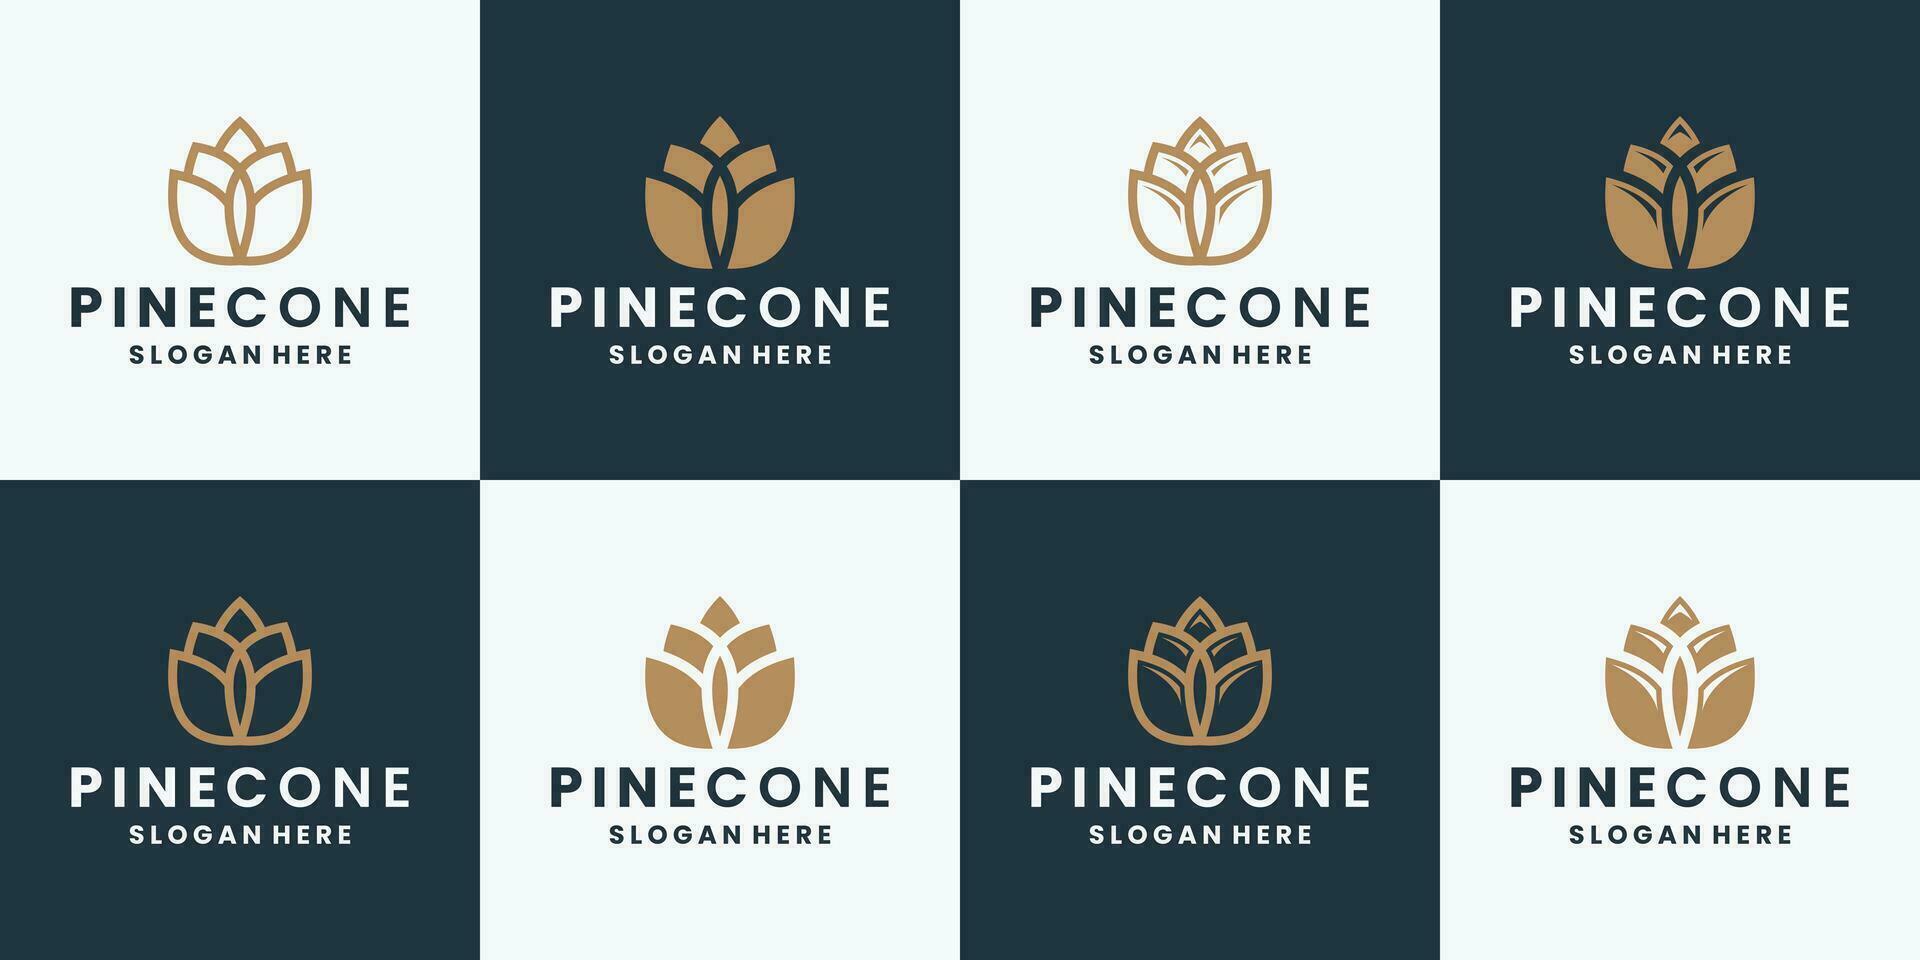 pine cone logo design collections flat style and line art vector